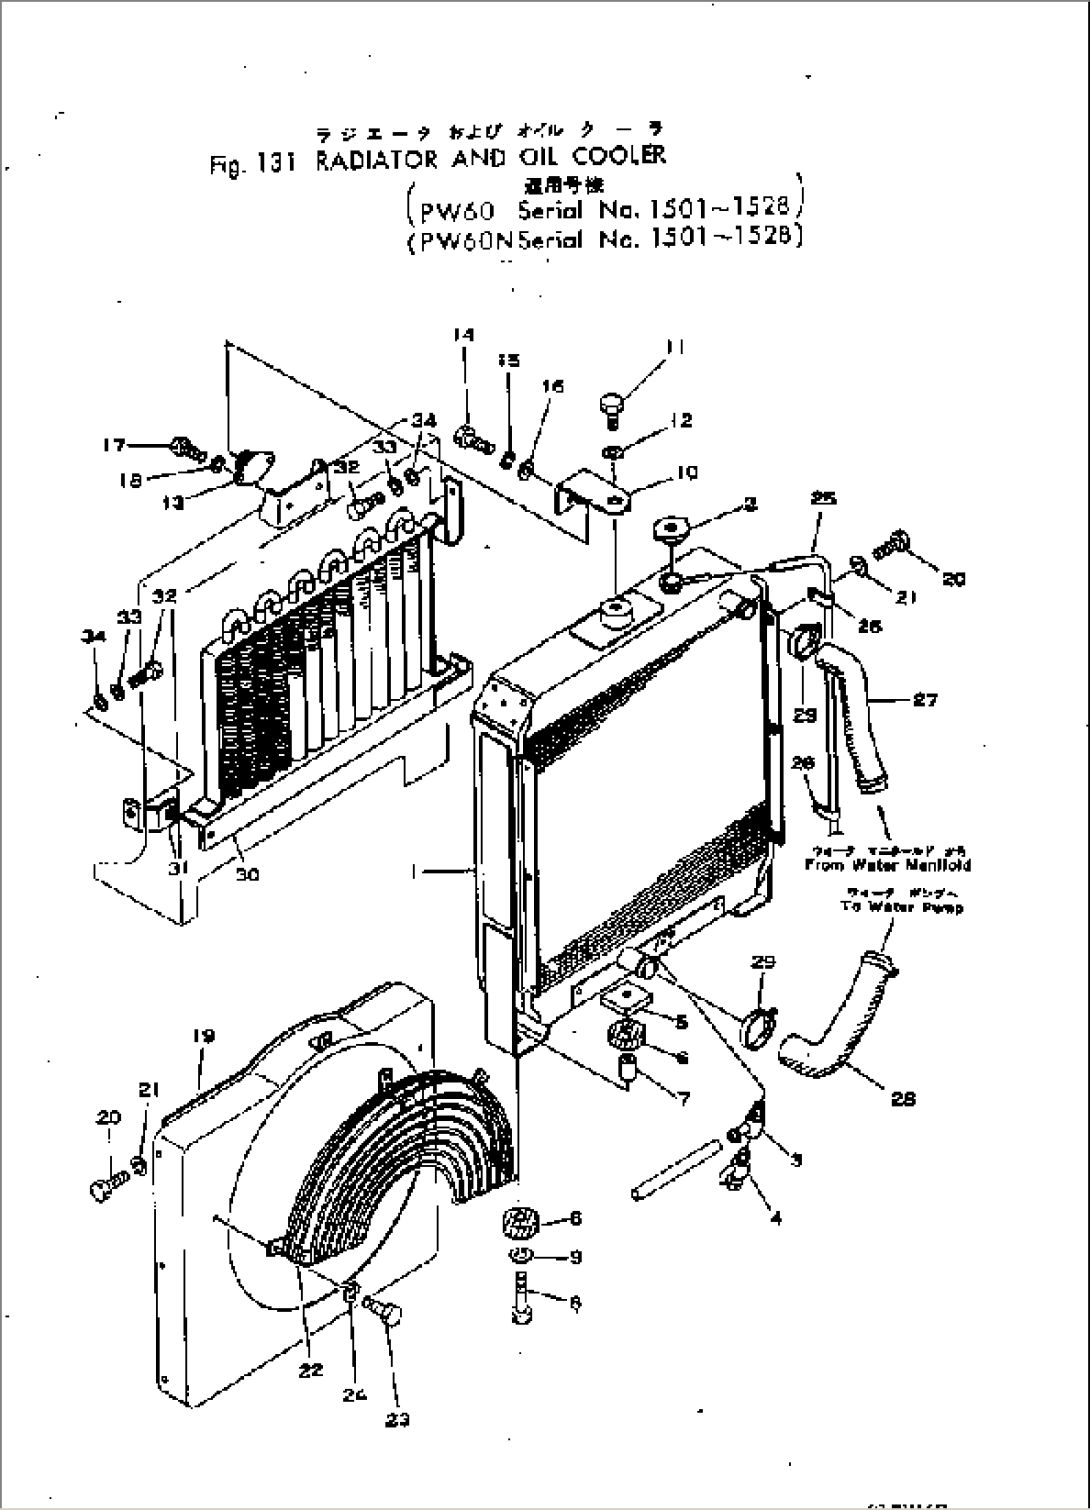 RADIATOR AND OIL COOLER(#1501-1528)